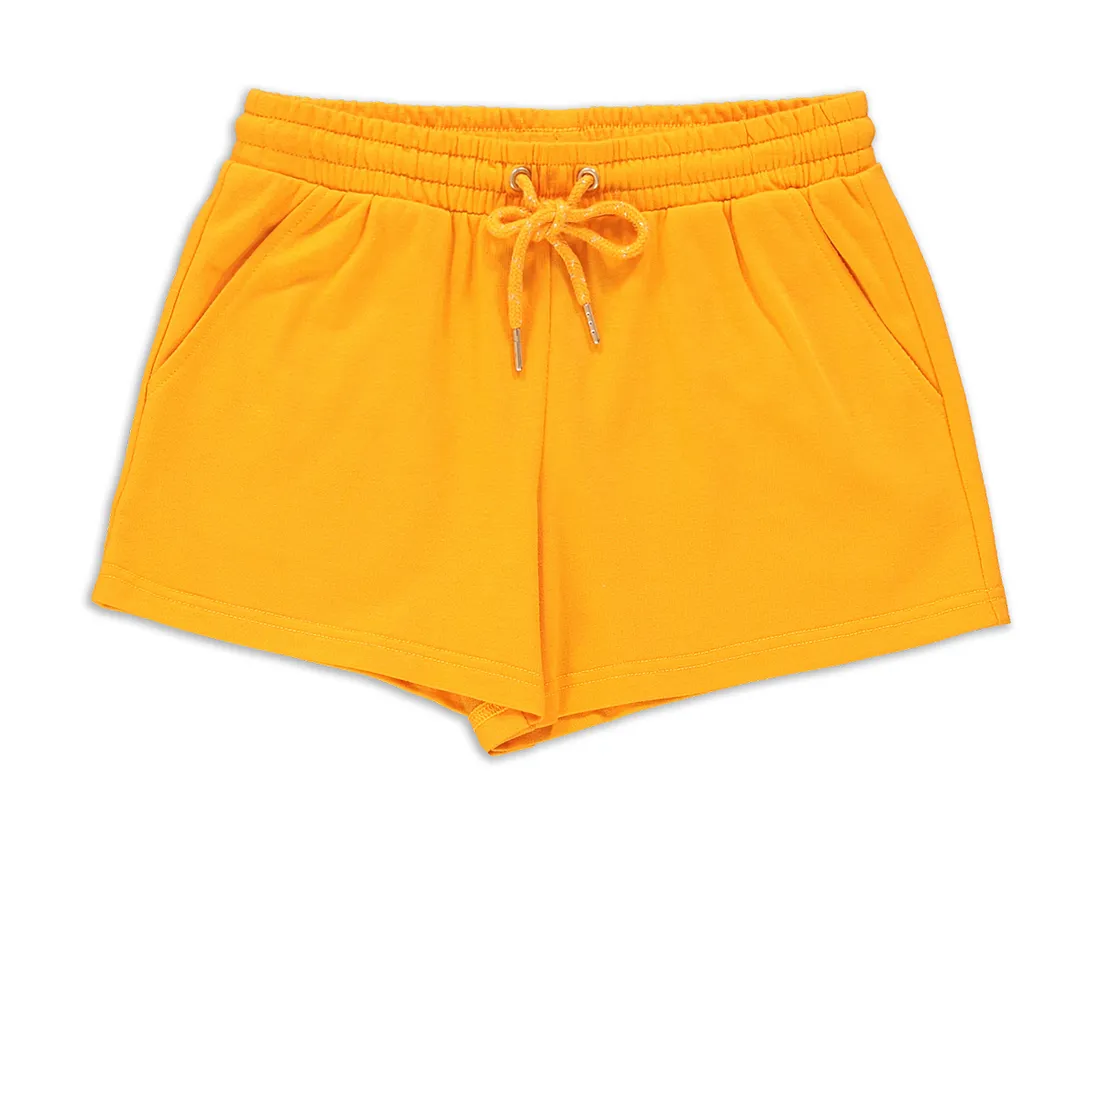 Jogger shorts yellow - GIRLS 7-15 YEARS Bottoms & Jeans | Ackermans